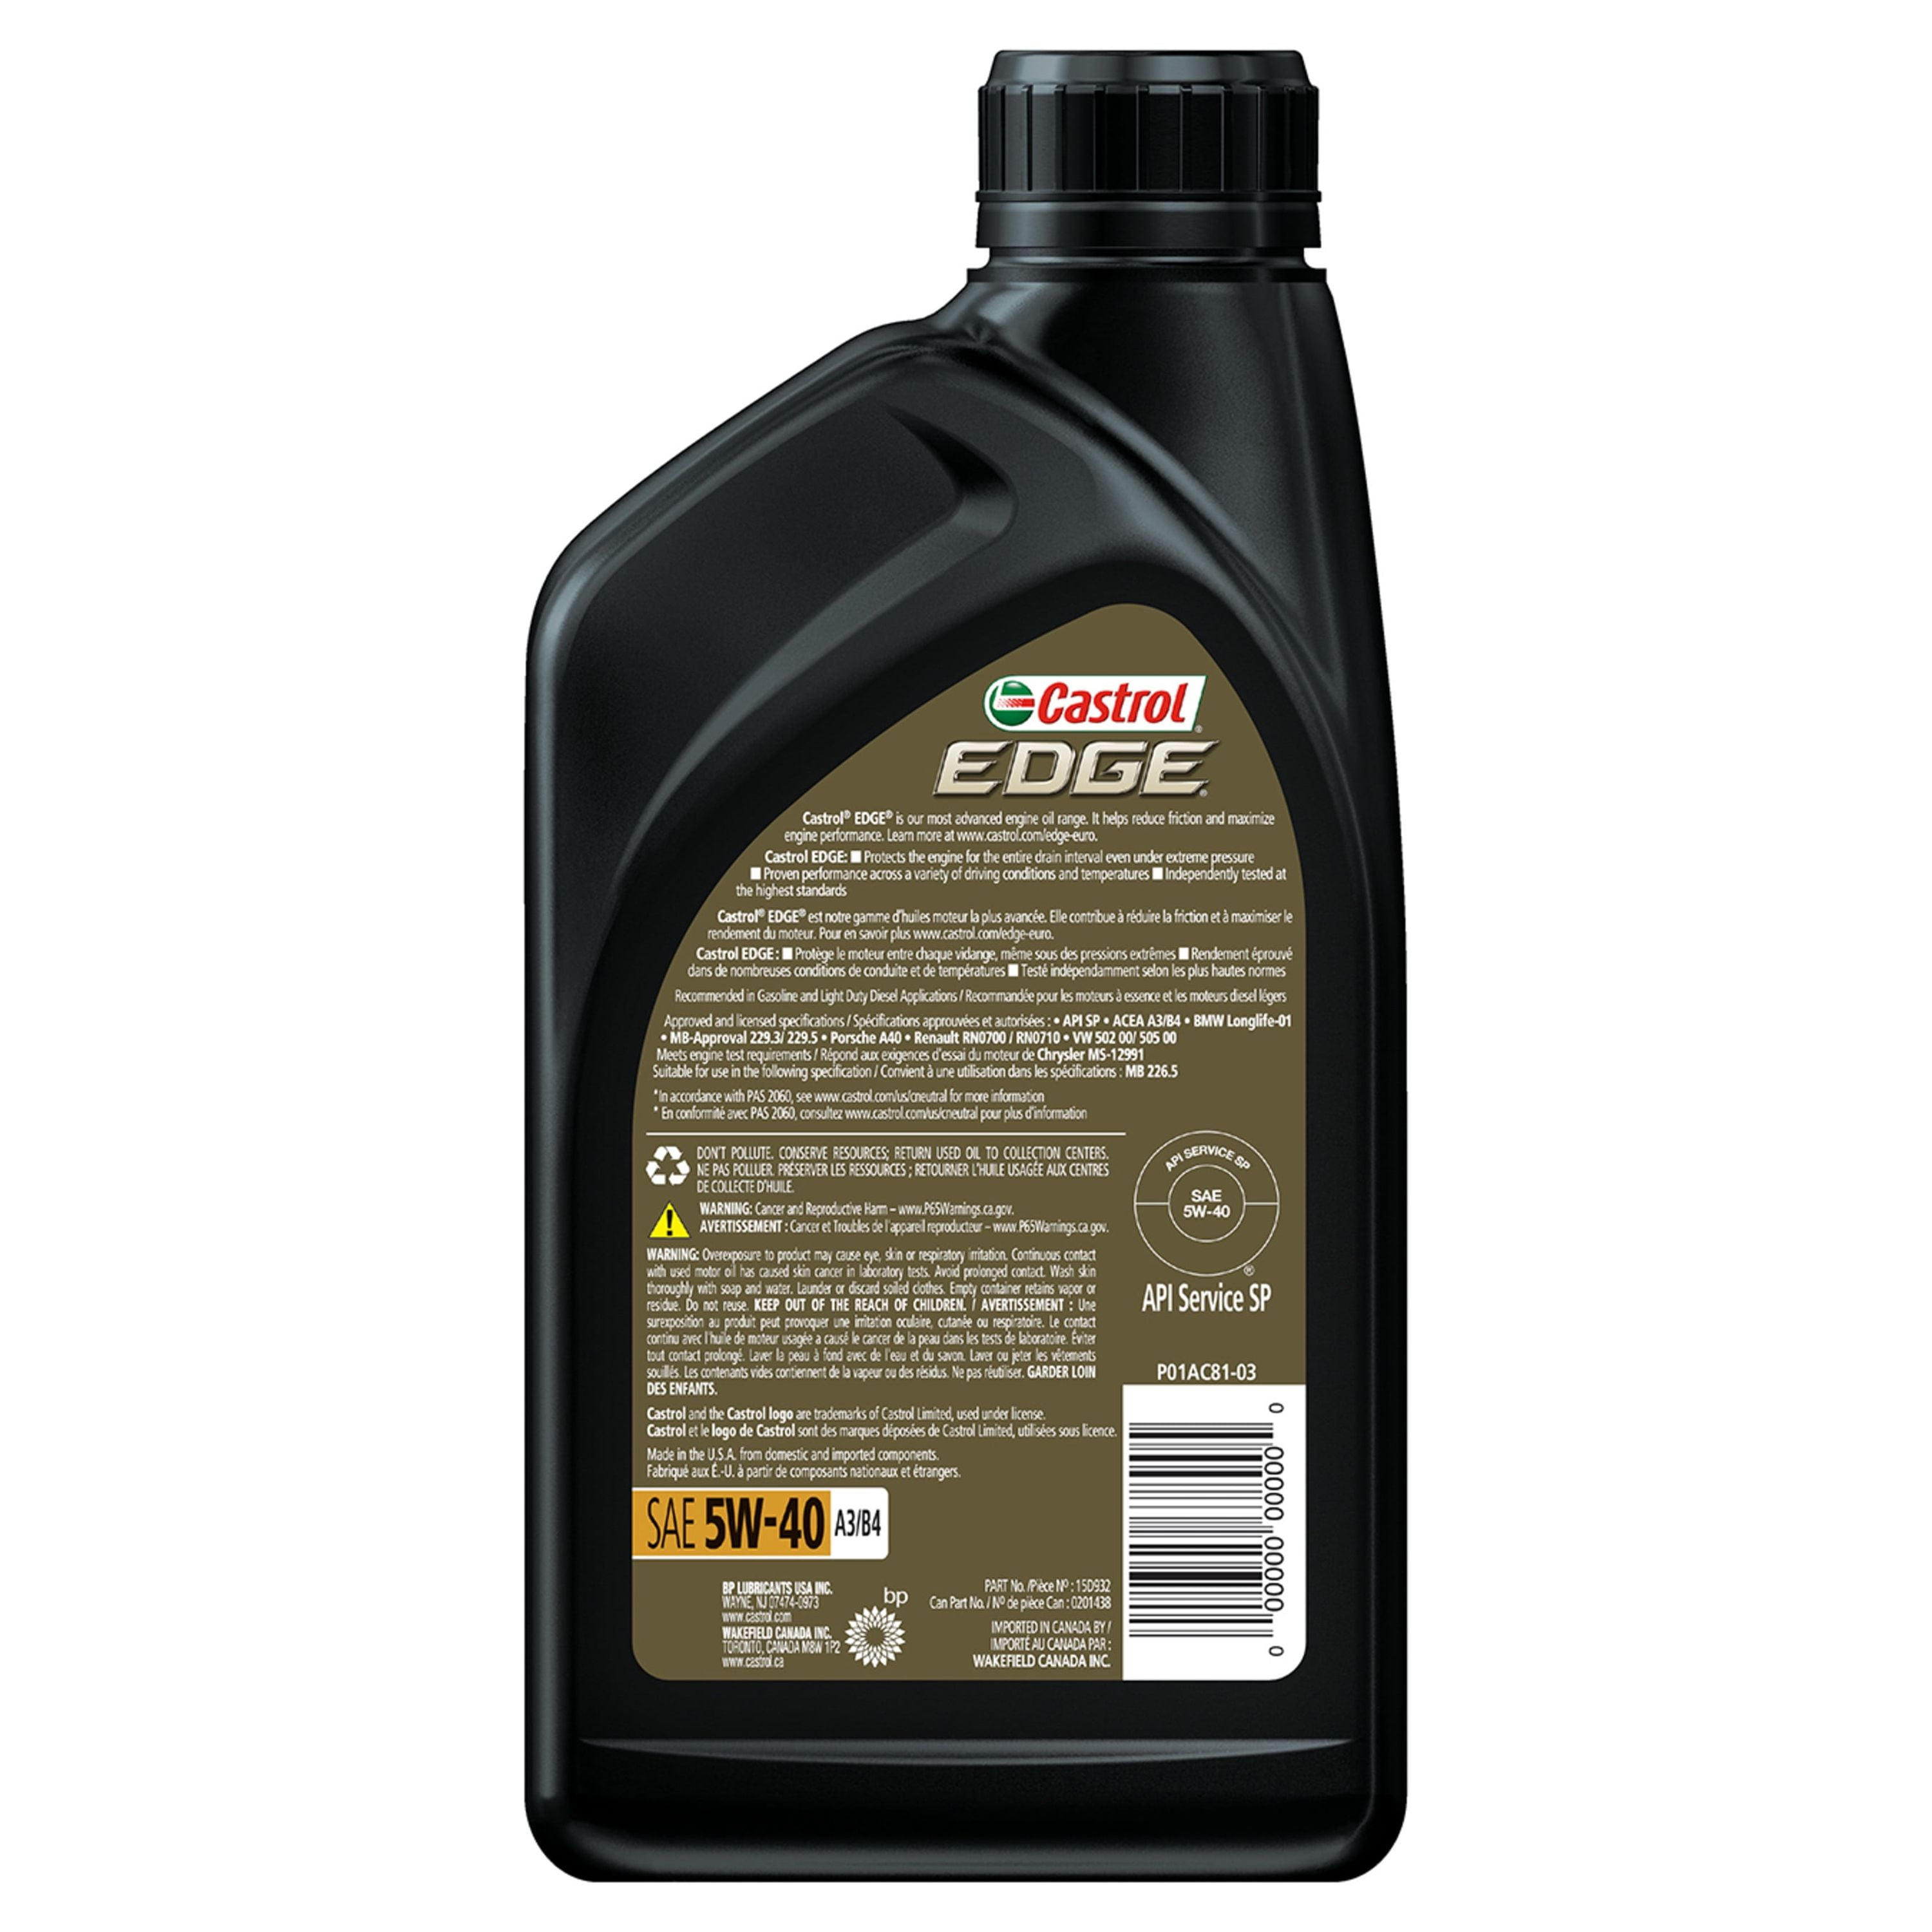 Castrol EDGE Euro 5W-40 A3/B4 Advanced Full Synthetic Motor Oil, 1 Quart,  Pack of 6 : Automotive 